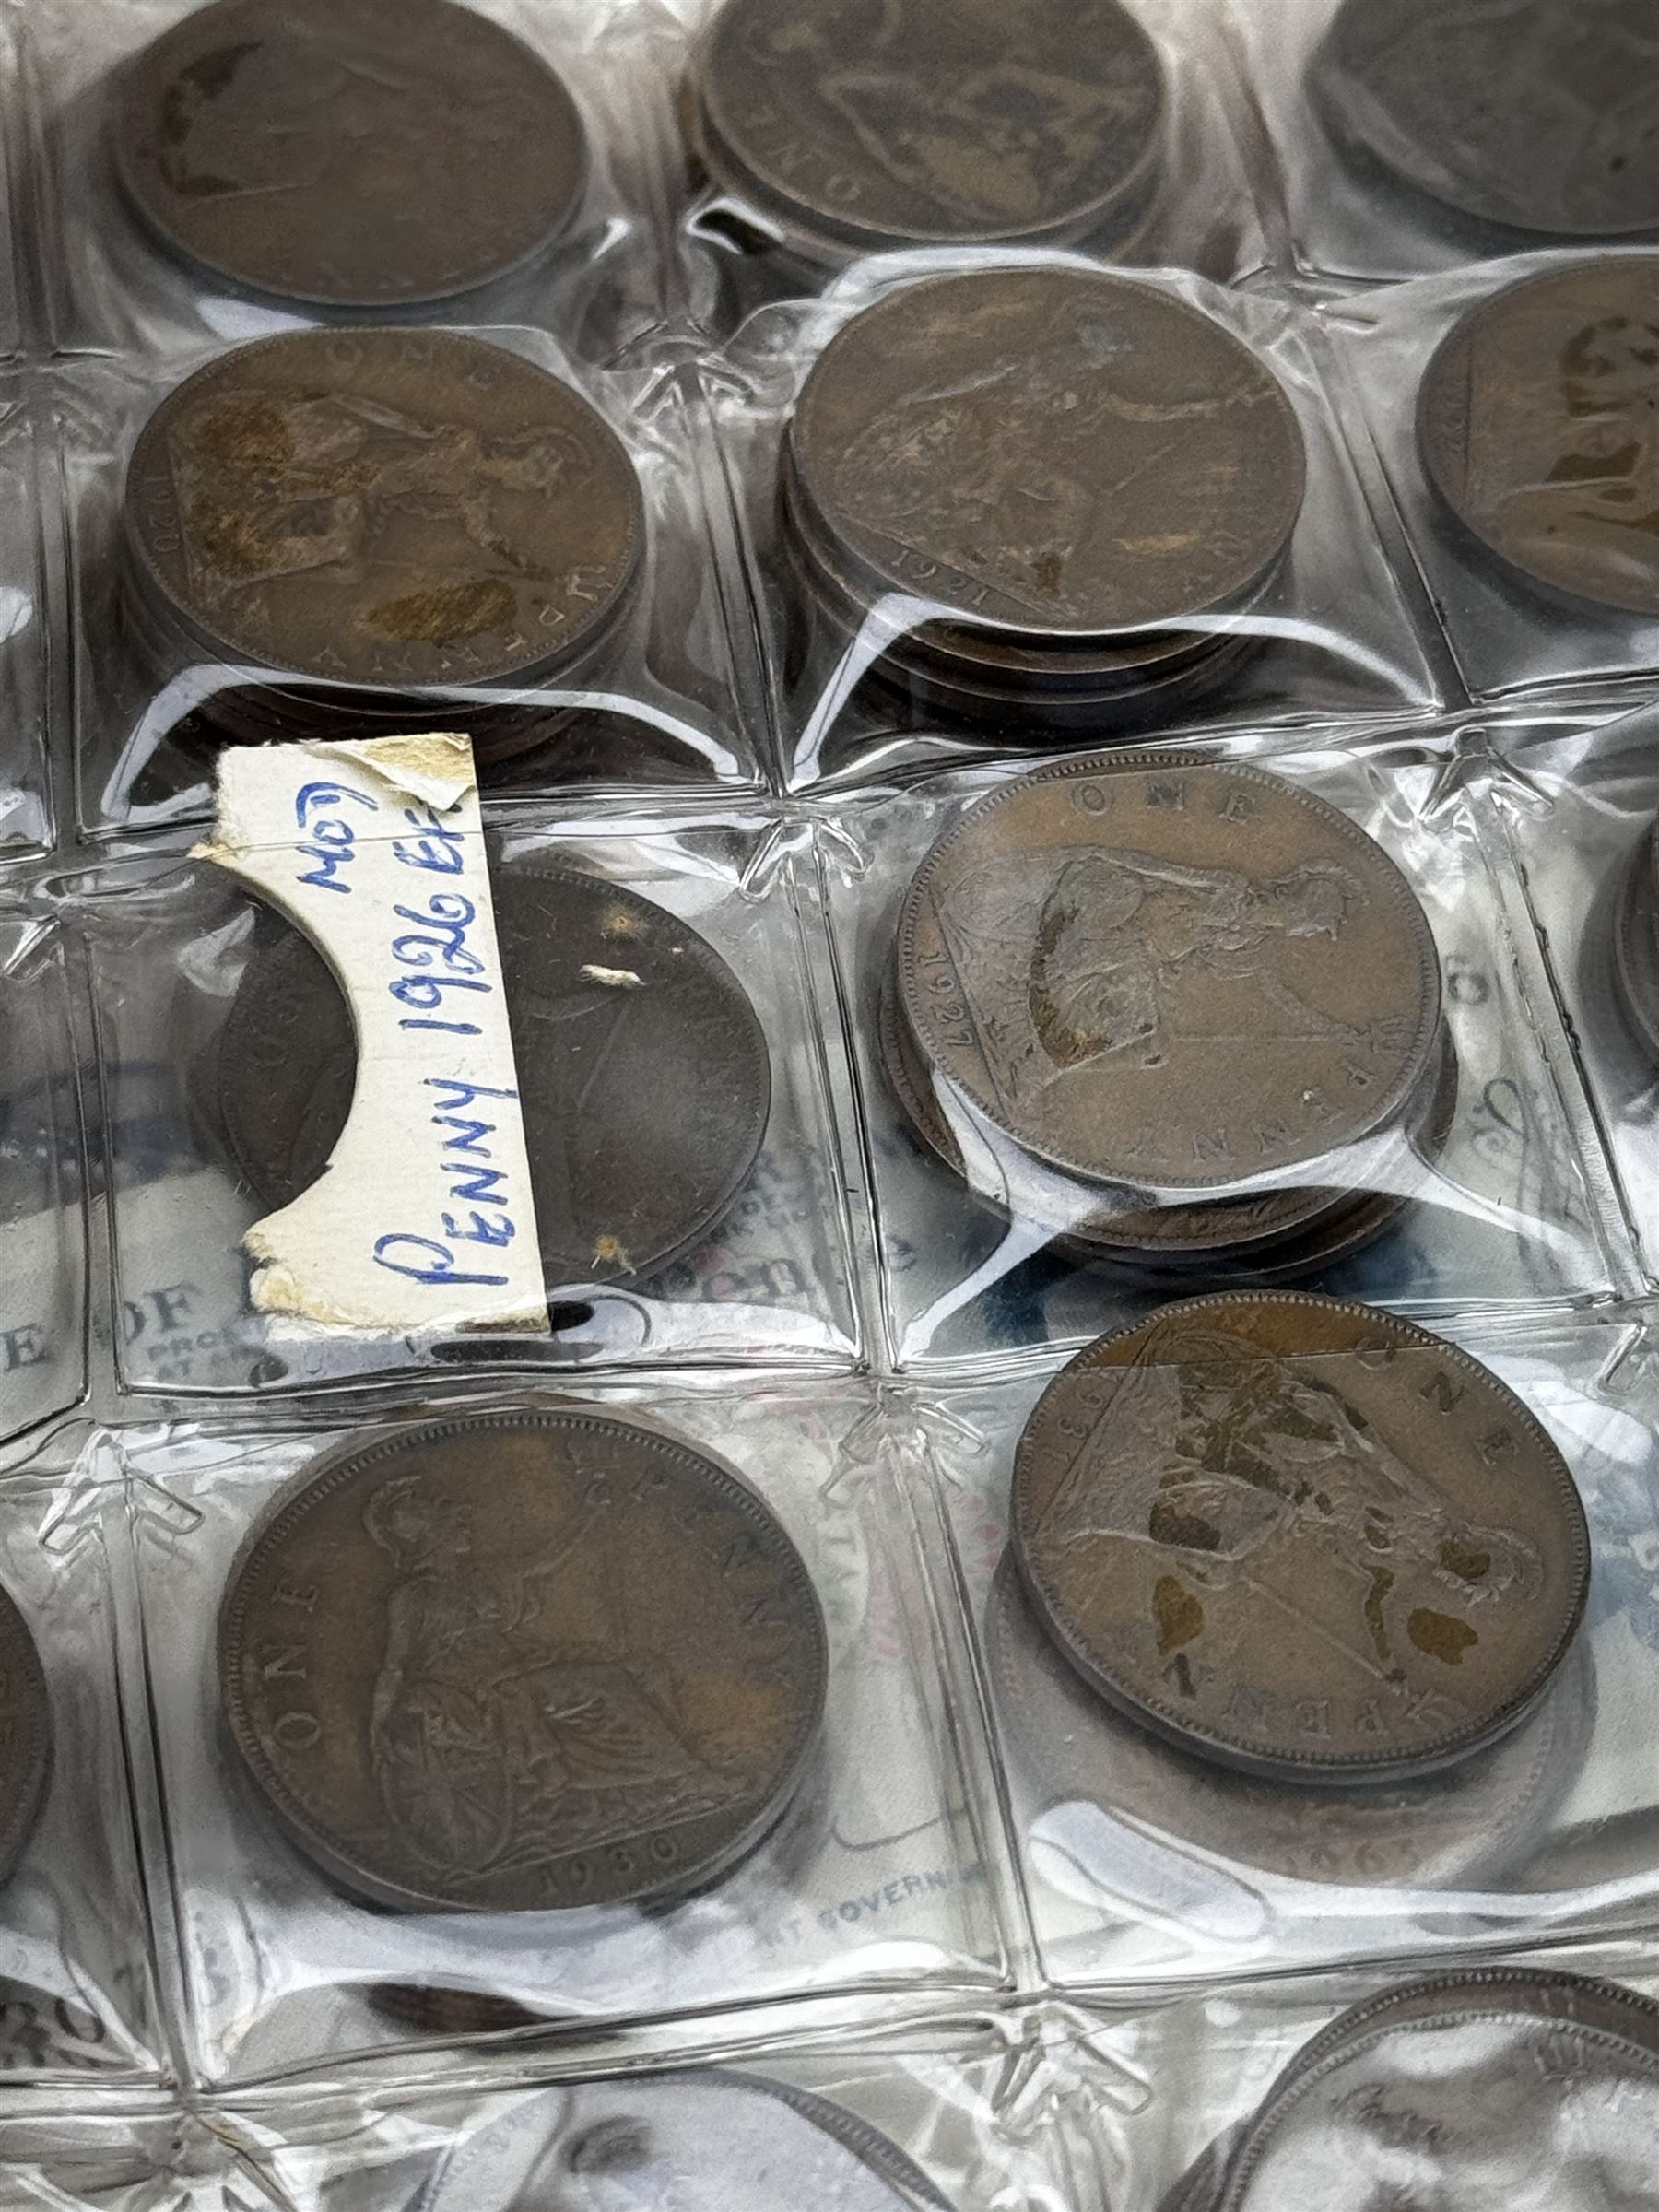 Mostly Great British coins - Image 7 of 7